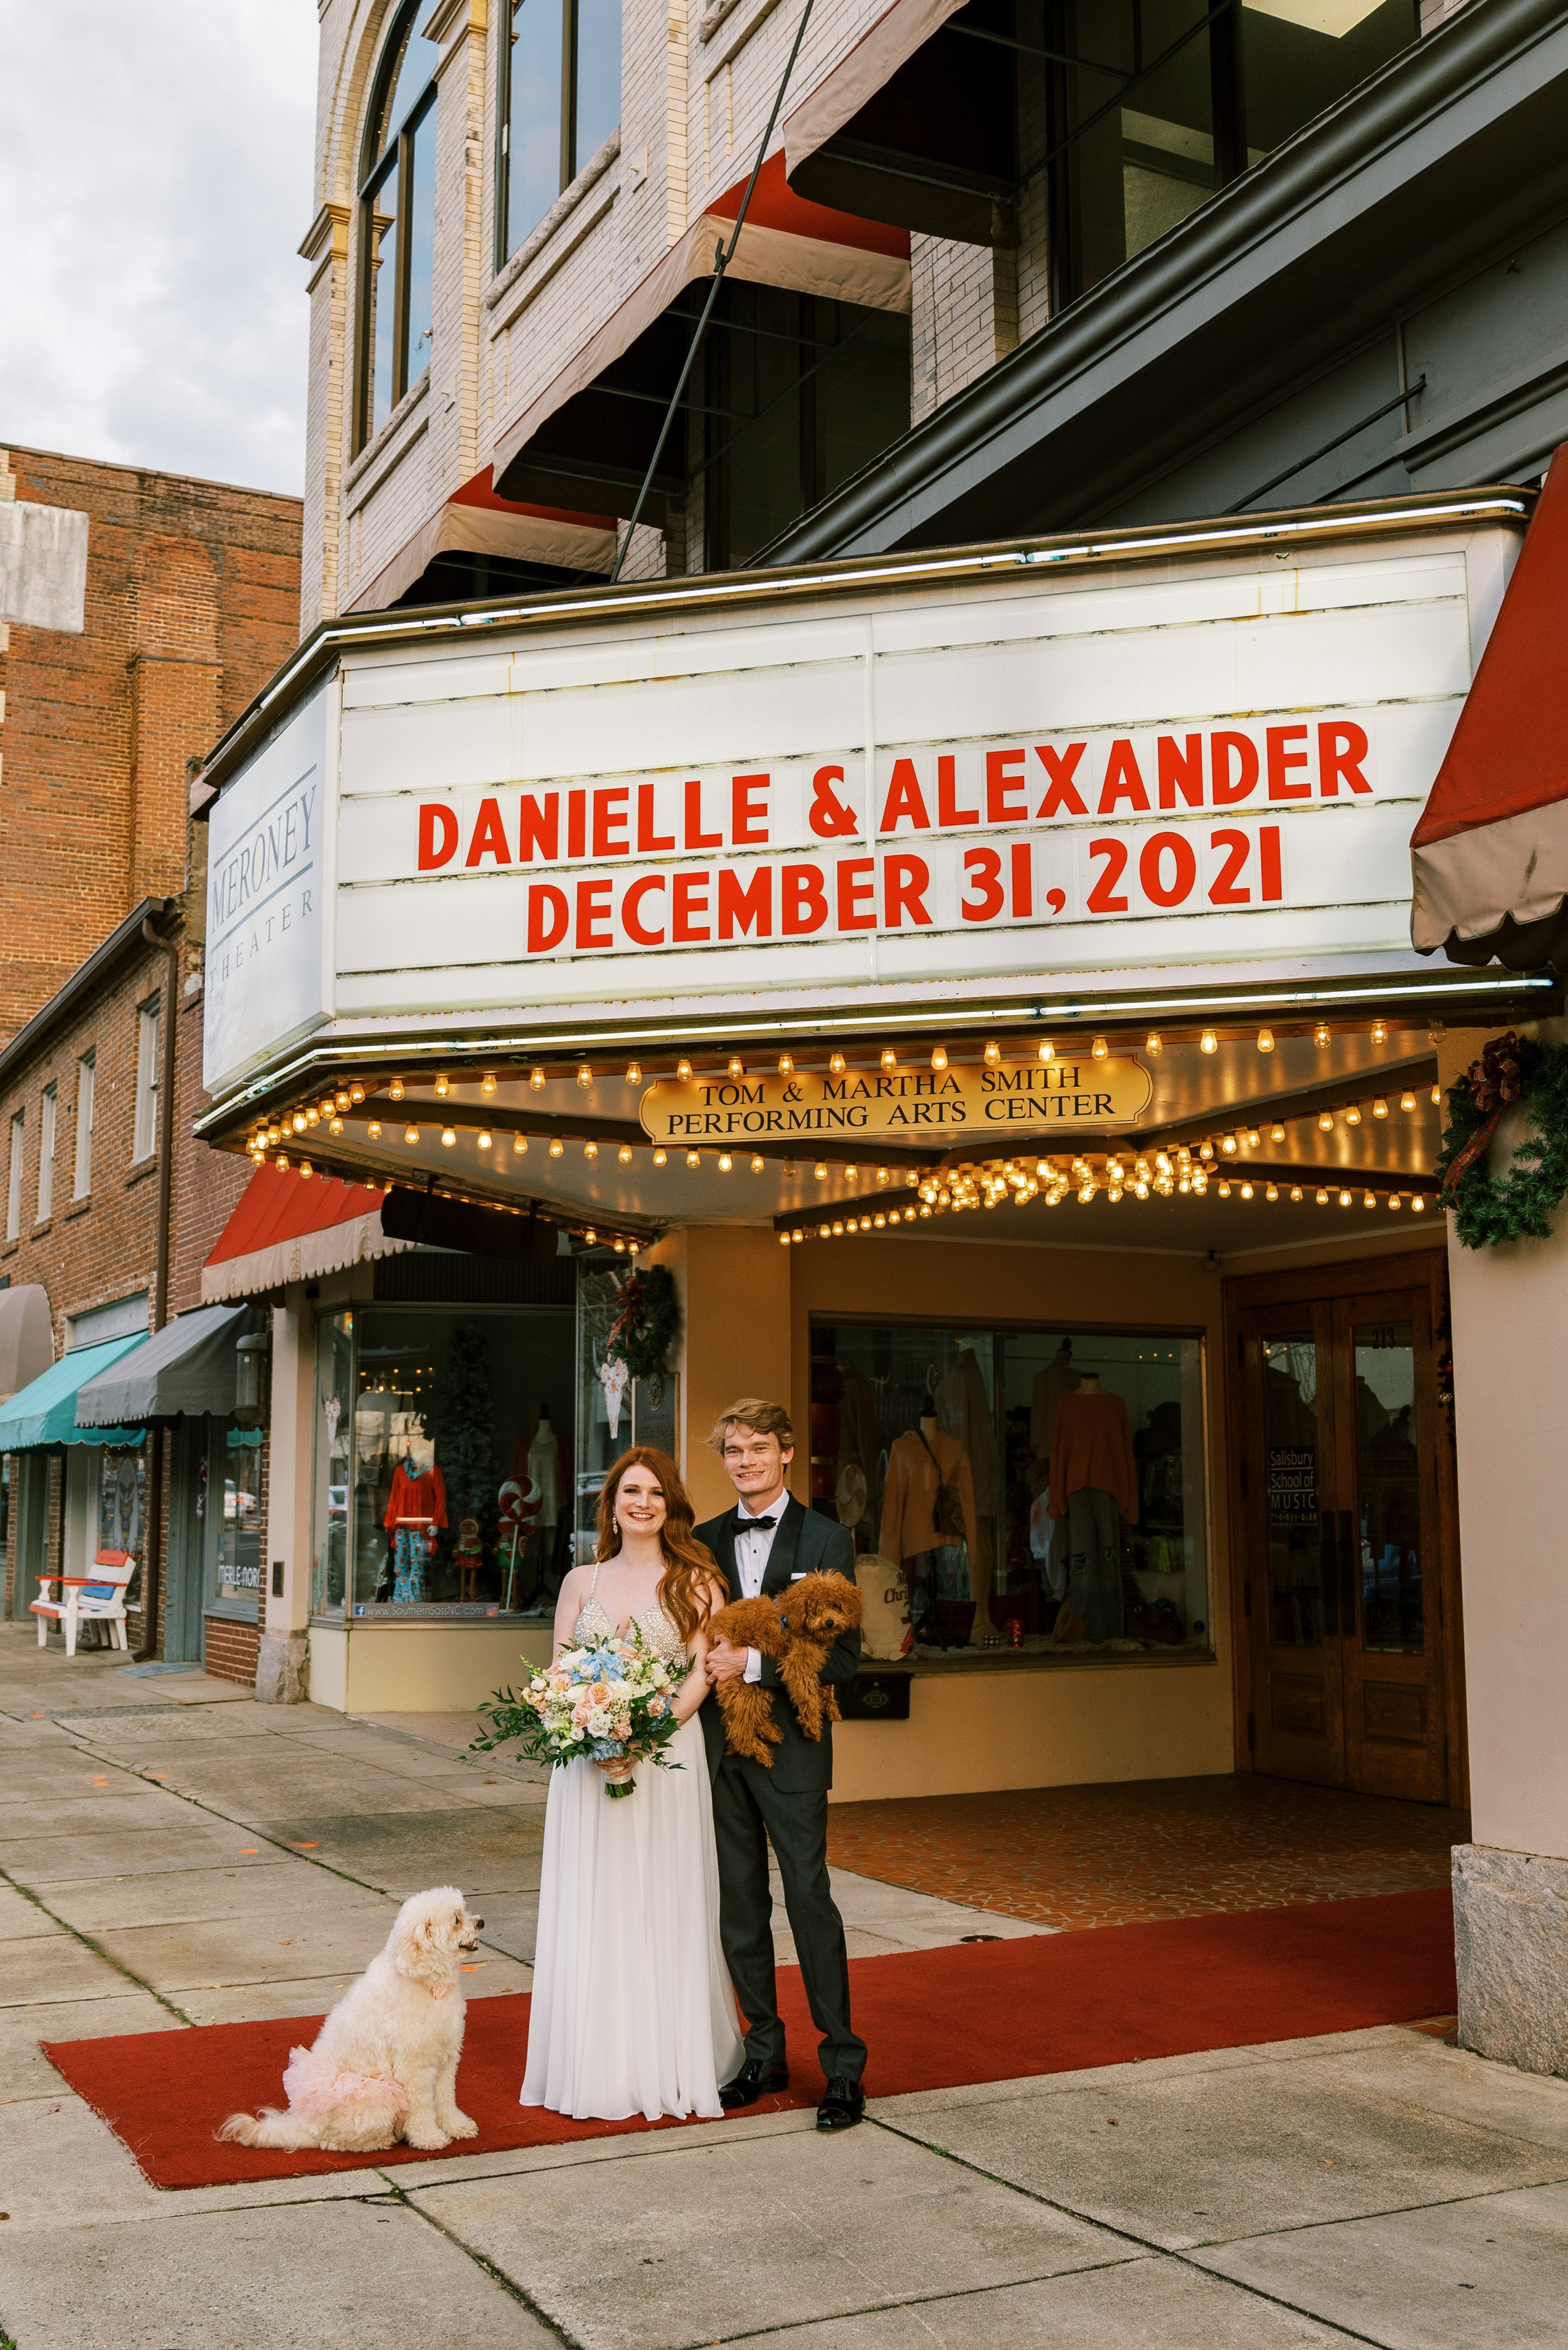 Danielle and Alexander with Puppies Salisbury North Carolina Wedding at The Meroney Theater Fancy This Photography